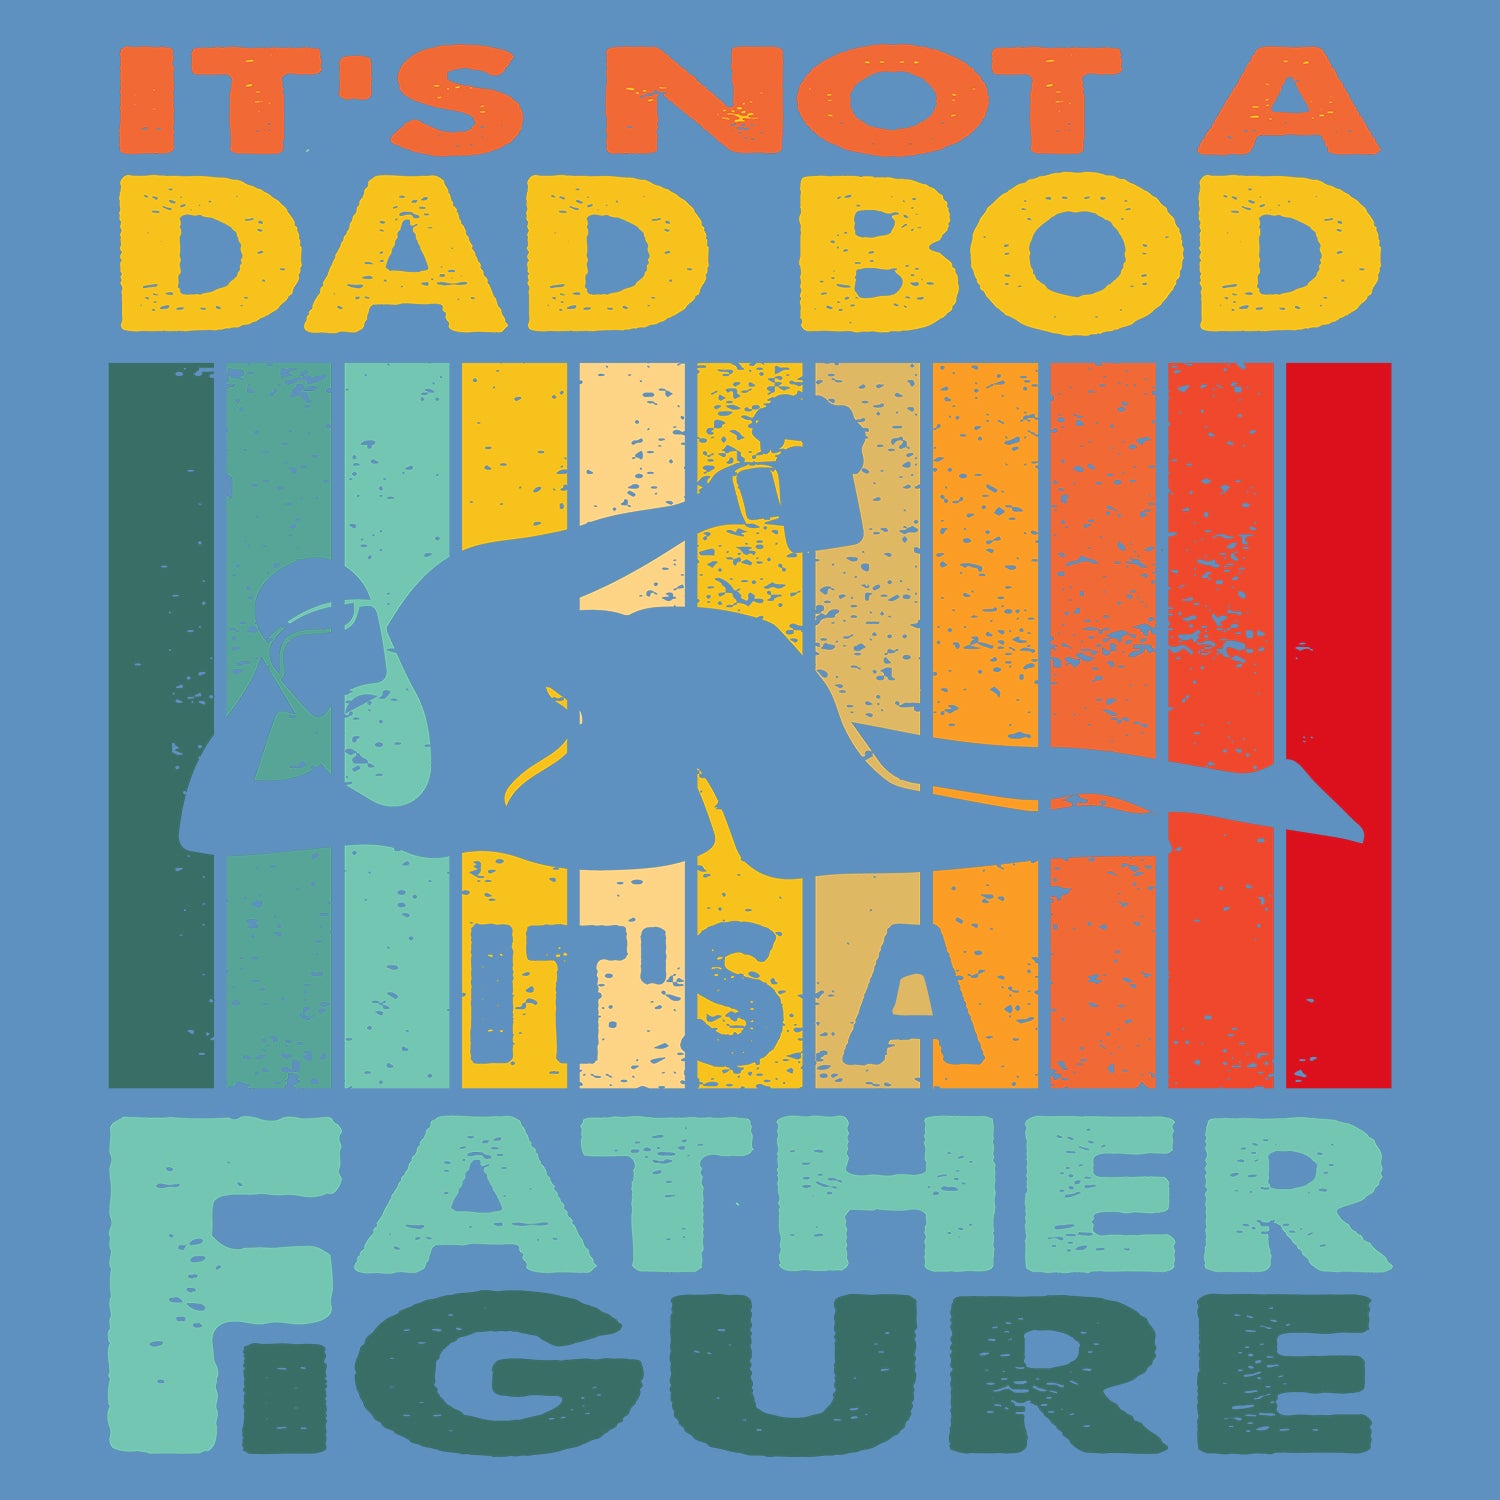 It's Not A Dad Bod It's A Father Figure Father's Day T-Shirt